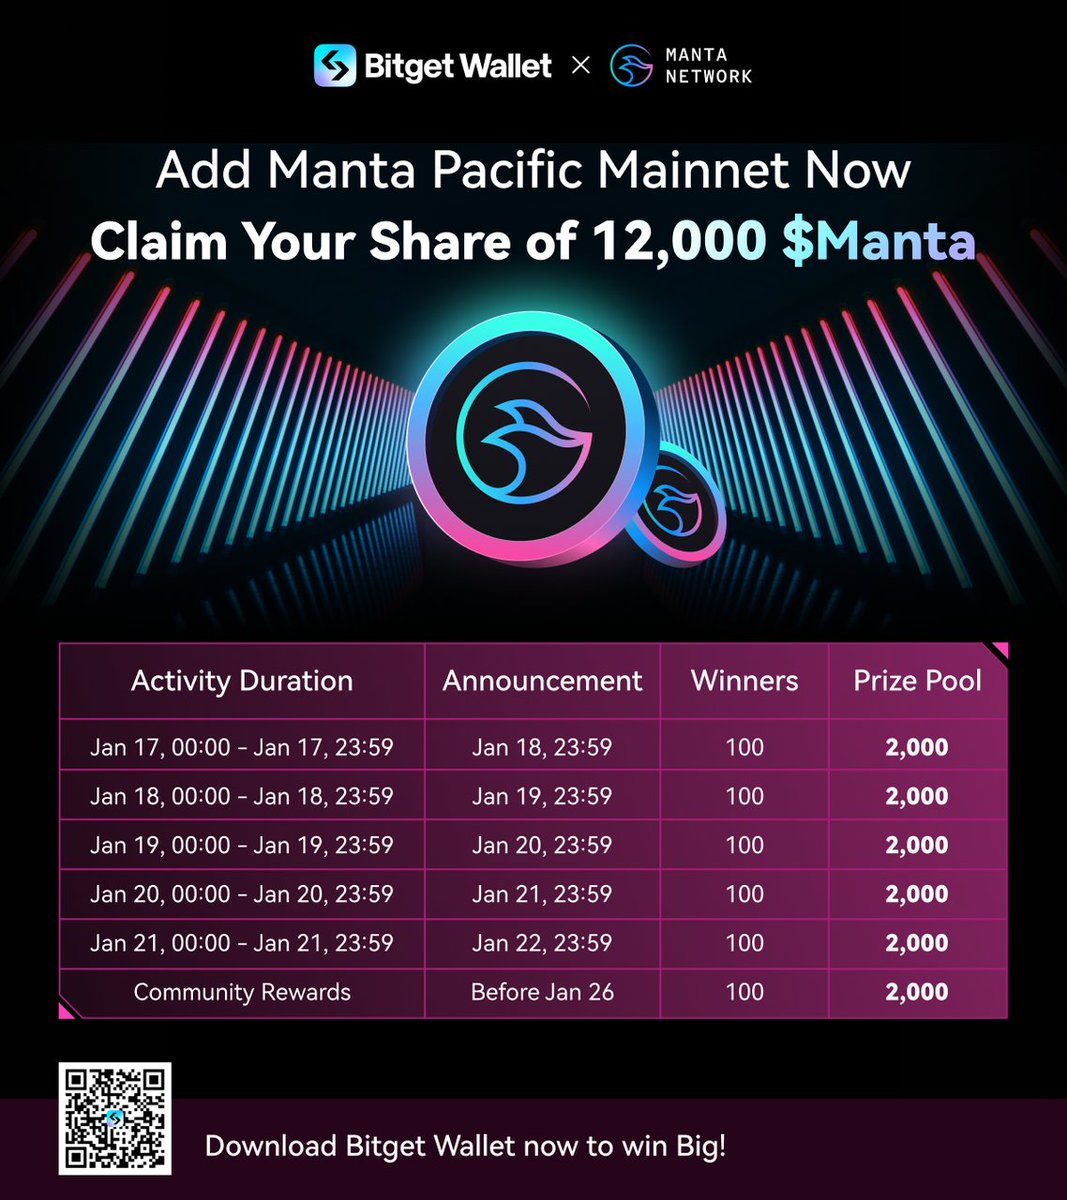 🌟 Get ready for @MantaNetwork's most spectacular campaign on Bitget Wallet! This is your last chance to earn free $MANTA! From Jan 17th, 00:00 to Jan 21st, 23:59, all new Bitget Wallet users stand a chance to be part of an incredible 12,000 $MANTA reward giveaway, absolutely…